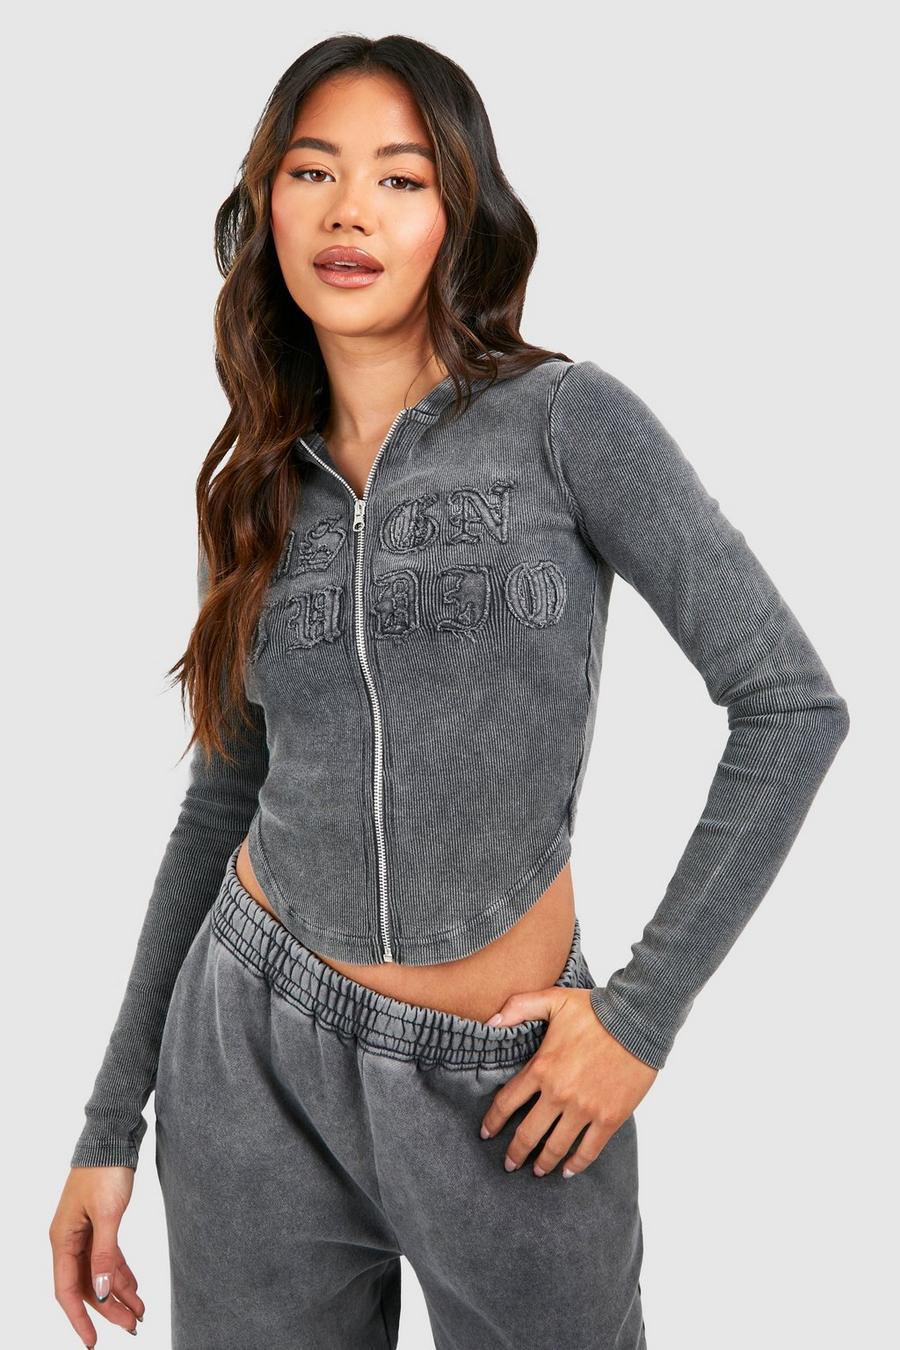 Charcoal Dsgn Studio Self Fabric Applique Washed Ribbed Zip Hoodie